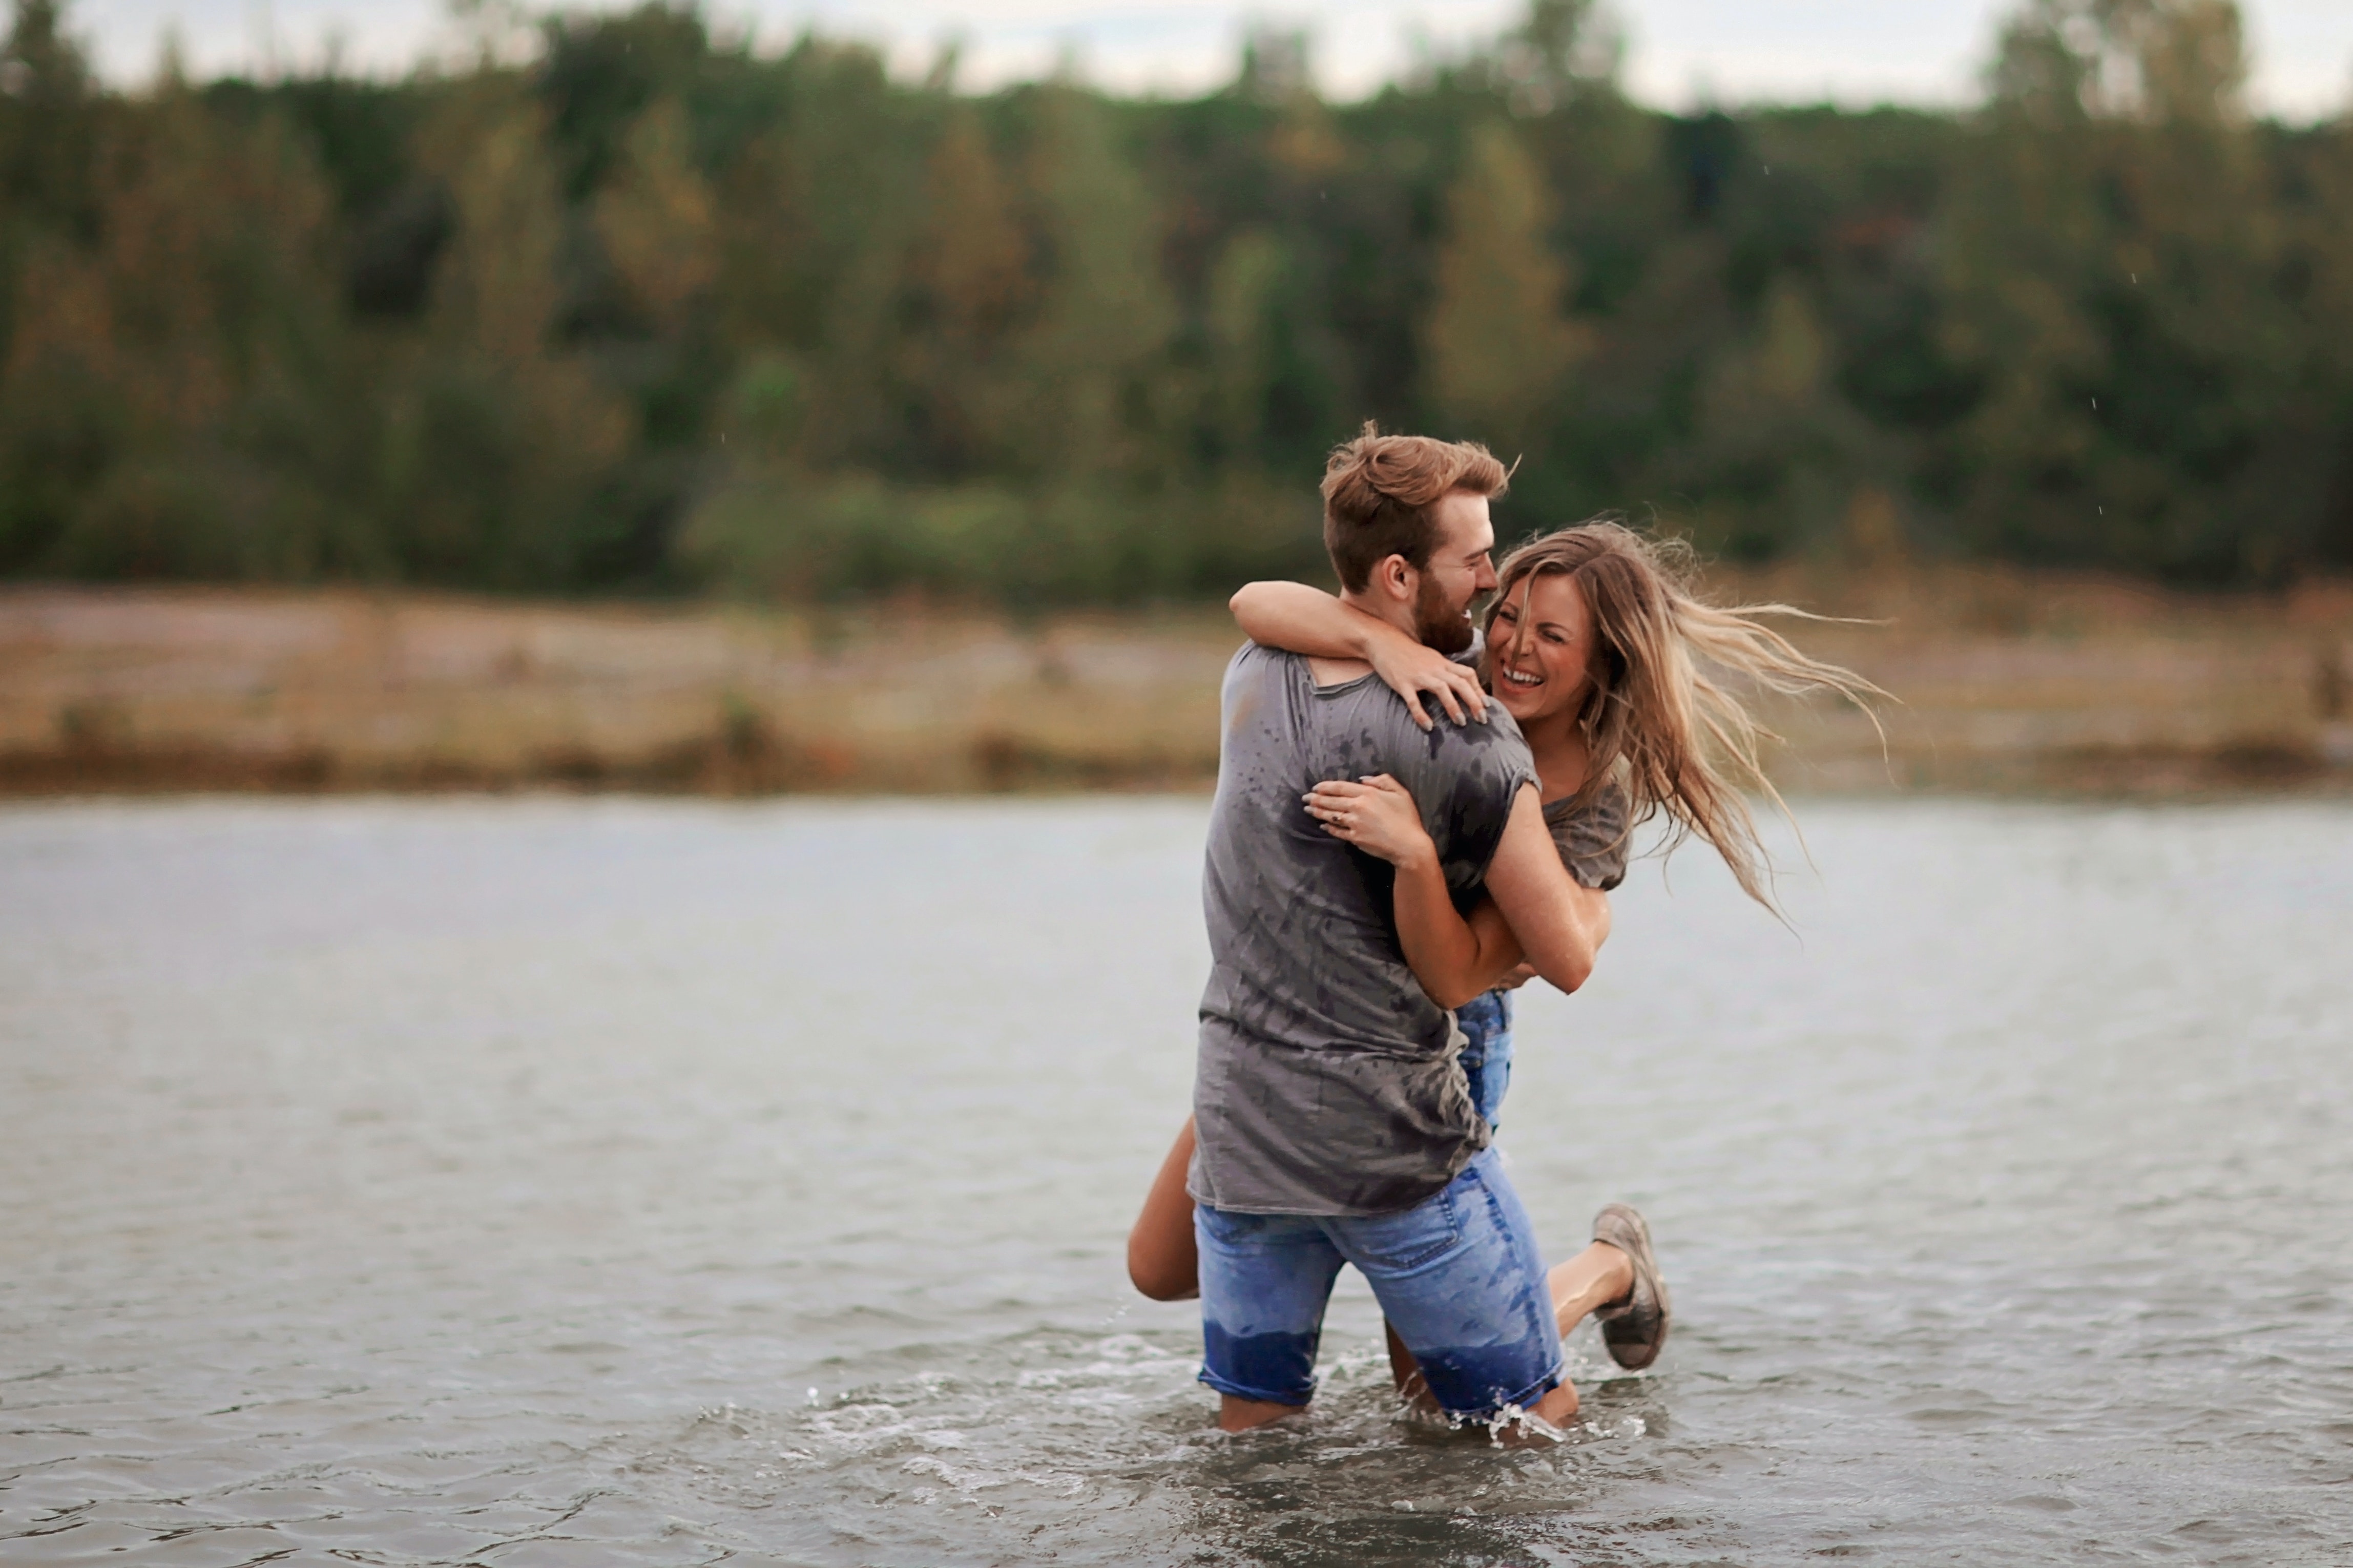 A couple happily plays in the water. | Source: Pexels